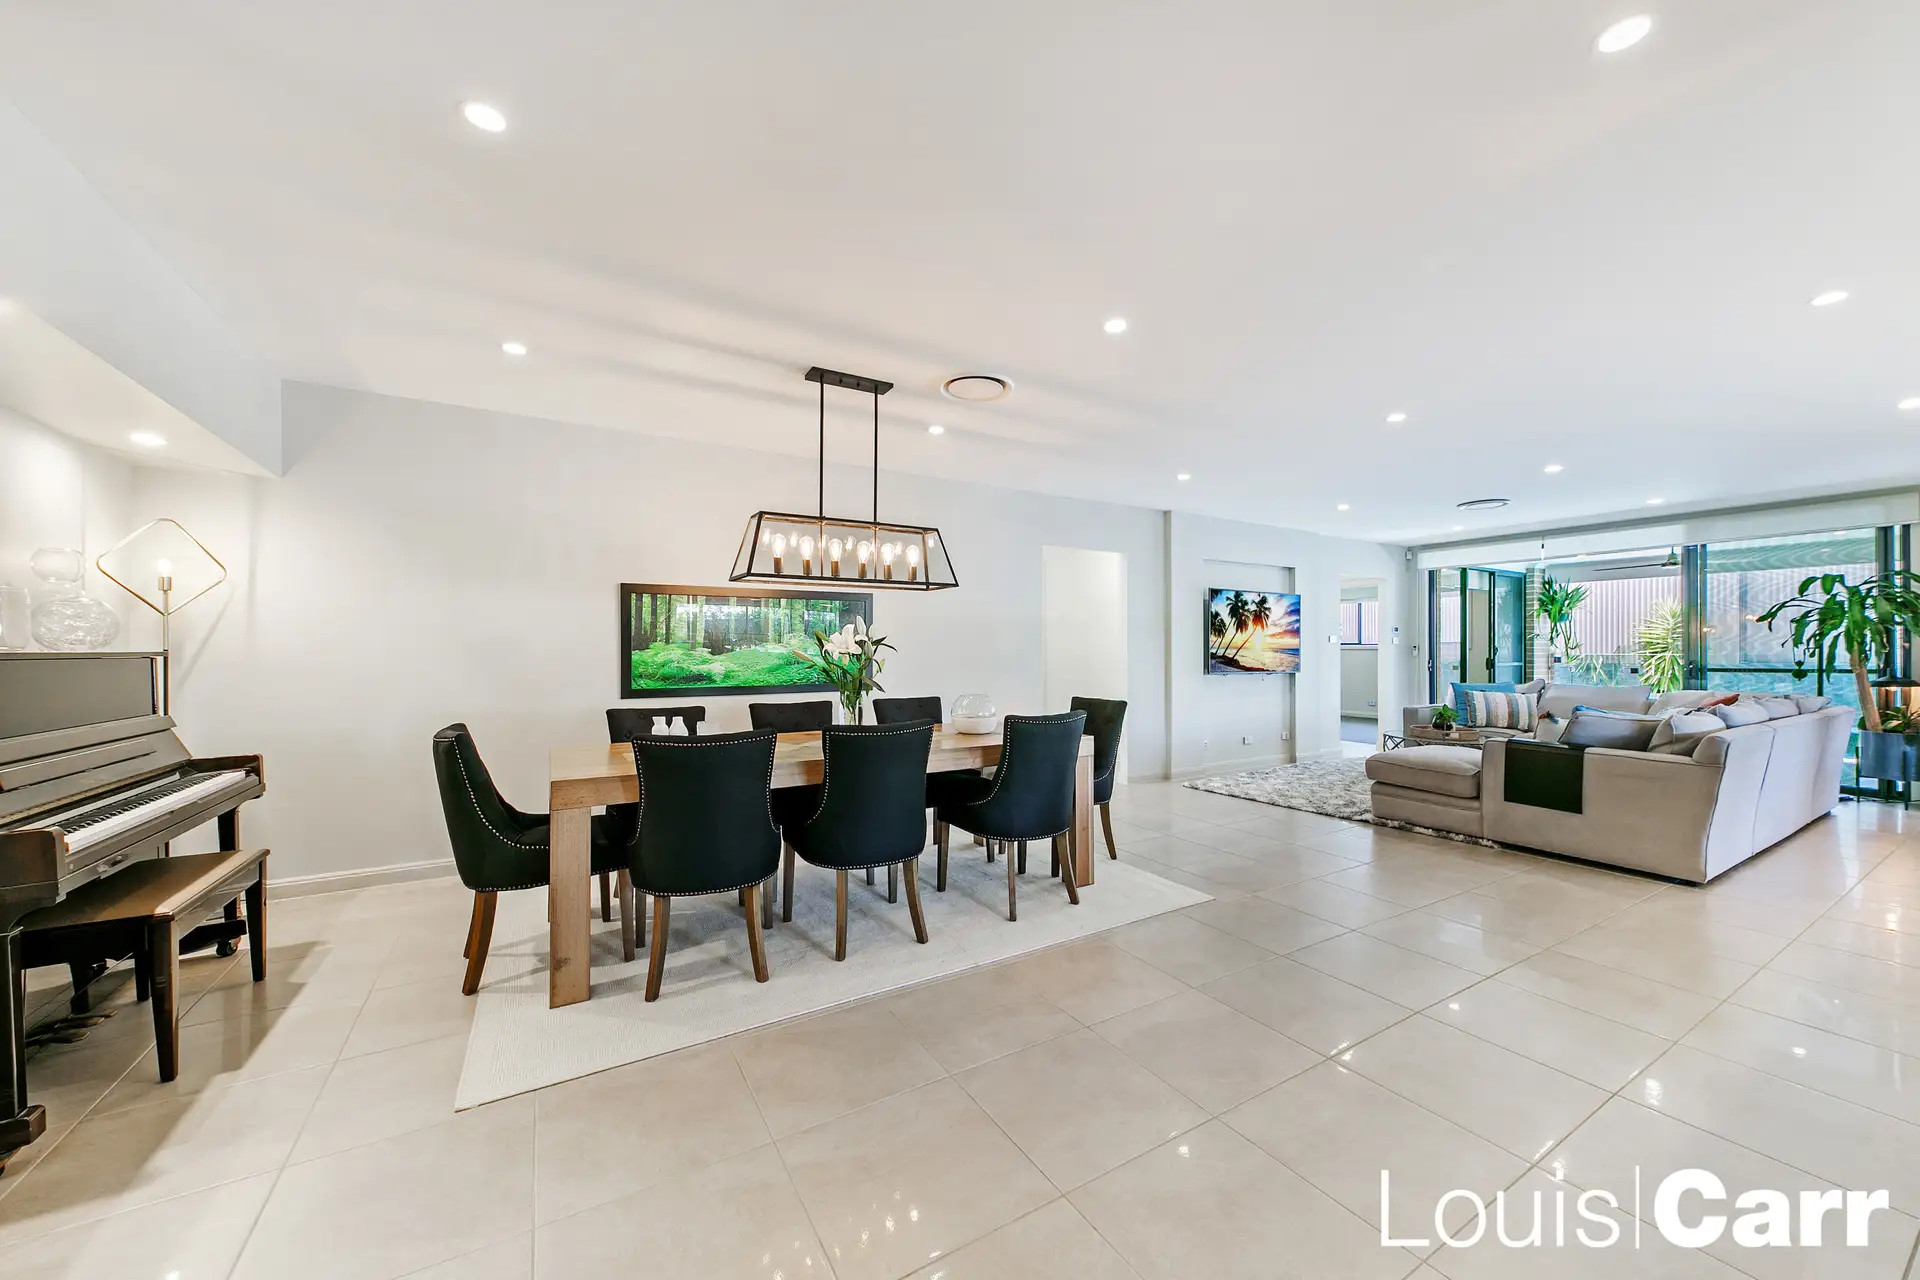 Photo #4: 11 Stynes Avenue, North Kellyville - Sold by Louis Carr Real Estate